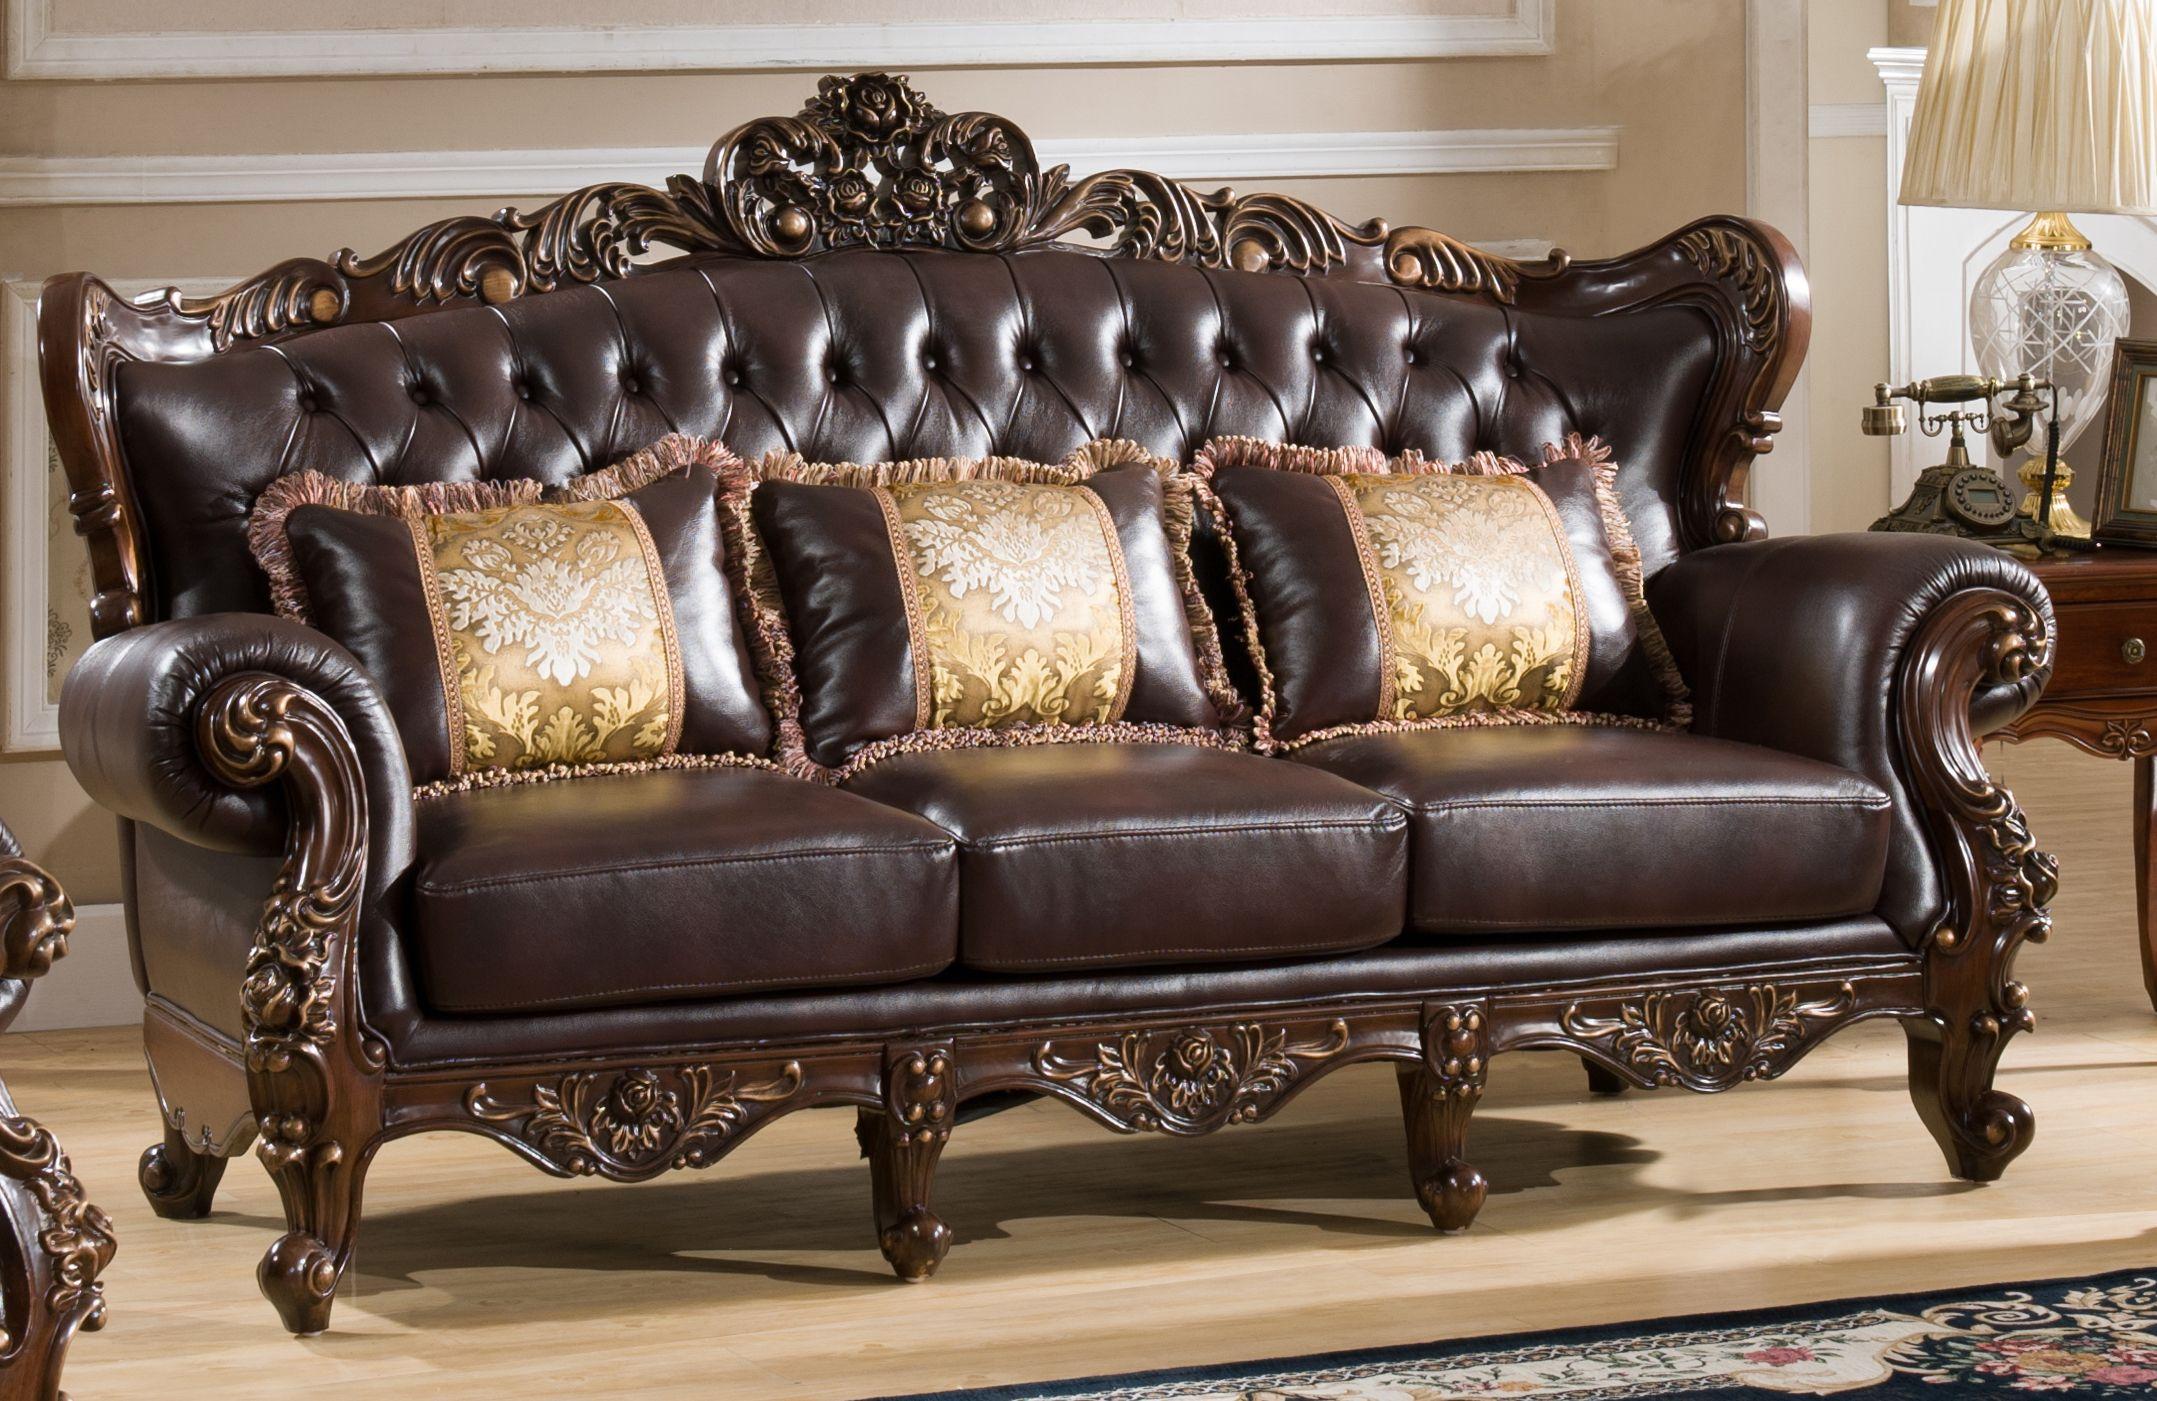 

    
Cherry finish Wood Brown Leather Sofa Set 3Pcs Traditional Cosmos Furniture Vanessa
